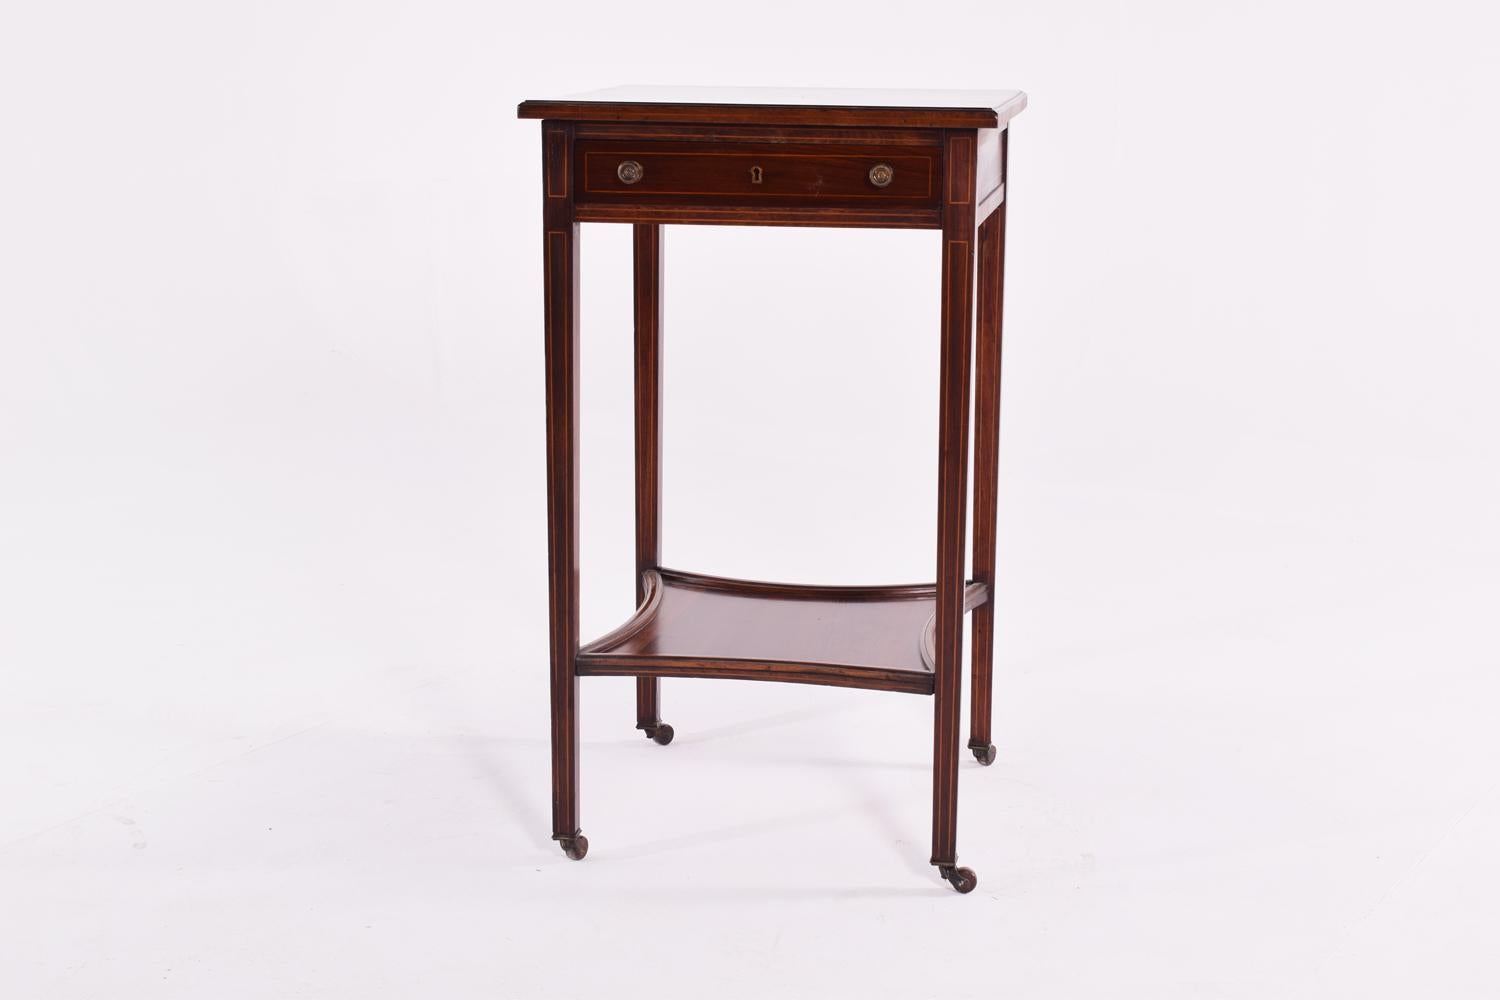 19th century George III rosewood side table with beautiful inlaid fan design satinwood inlays, shaped stretcher and tapered legs, and a single drawer. With solid rosewood and rosewood veneers.